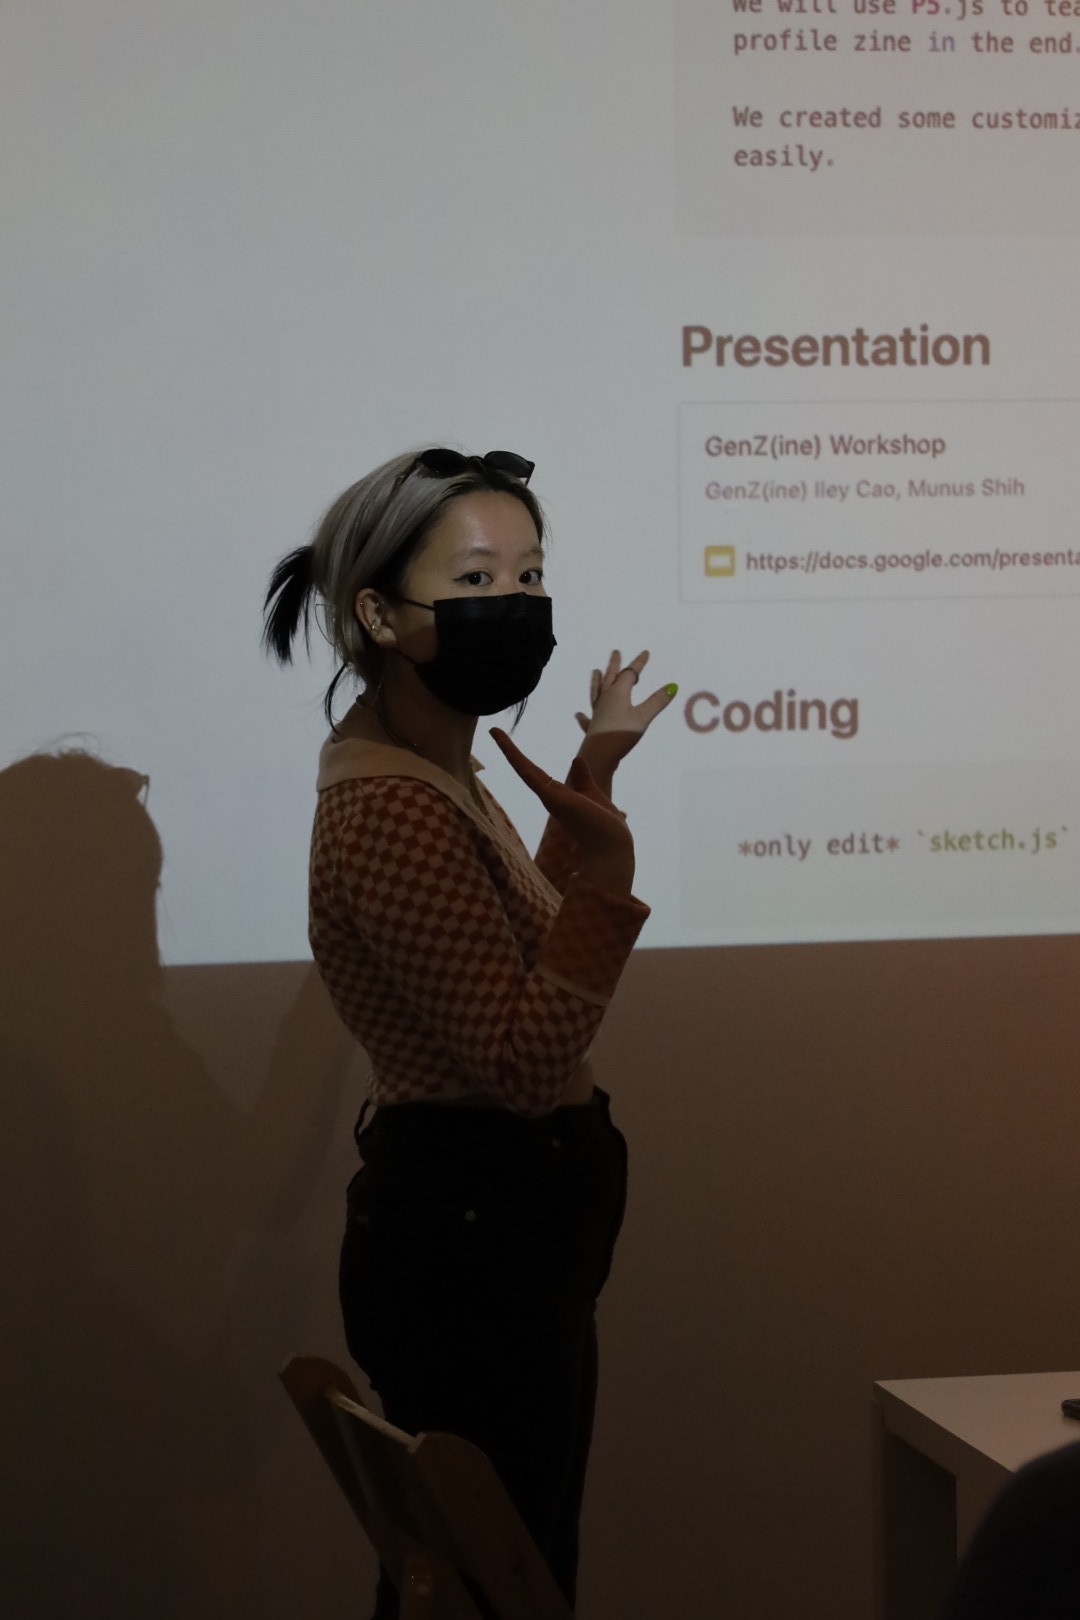 Iley Cao, who has bleached straight hair tied to a low ponytail, is wearing a black mask, a sweater with red and white checkerboard pattern, and sunglasses on her head. She is lighted by the projection of a workshop she is co-leading.